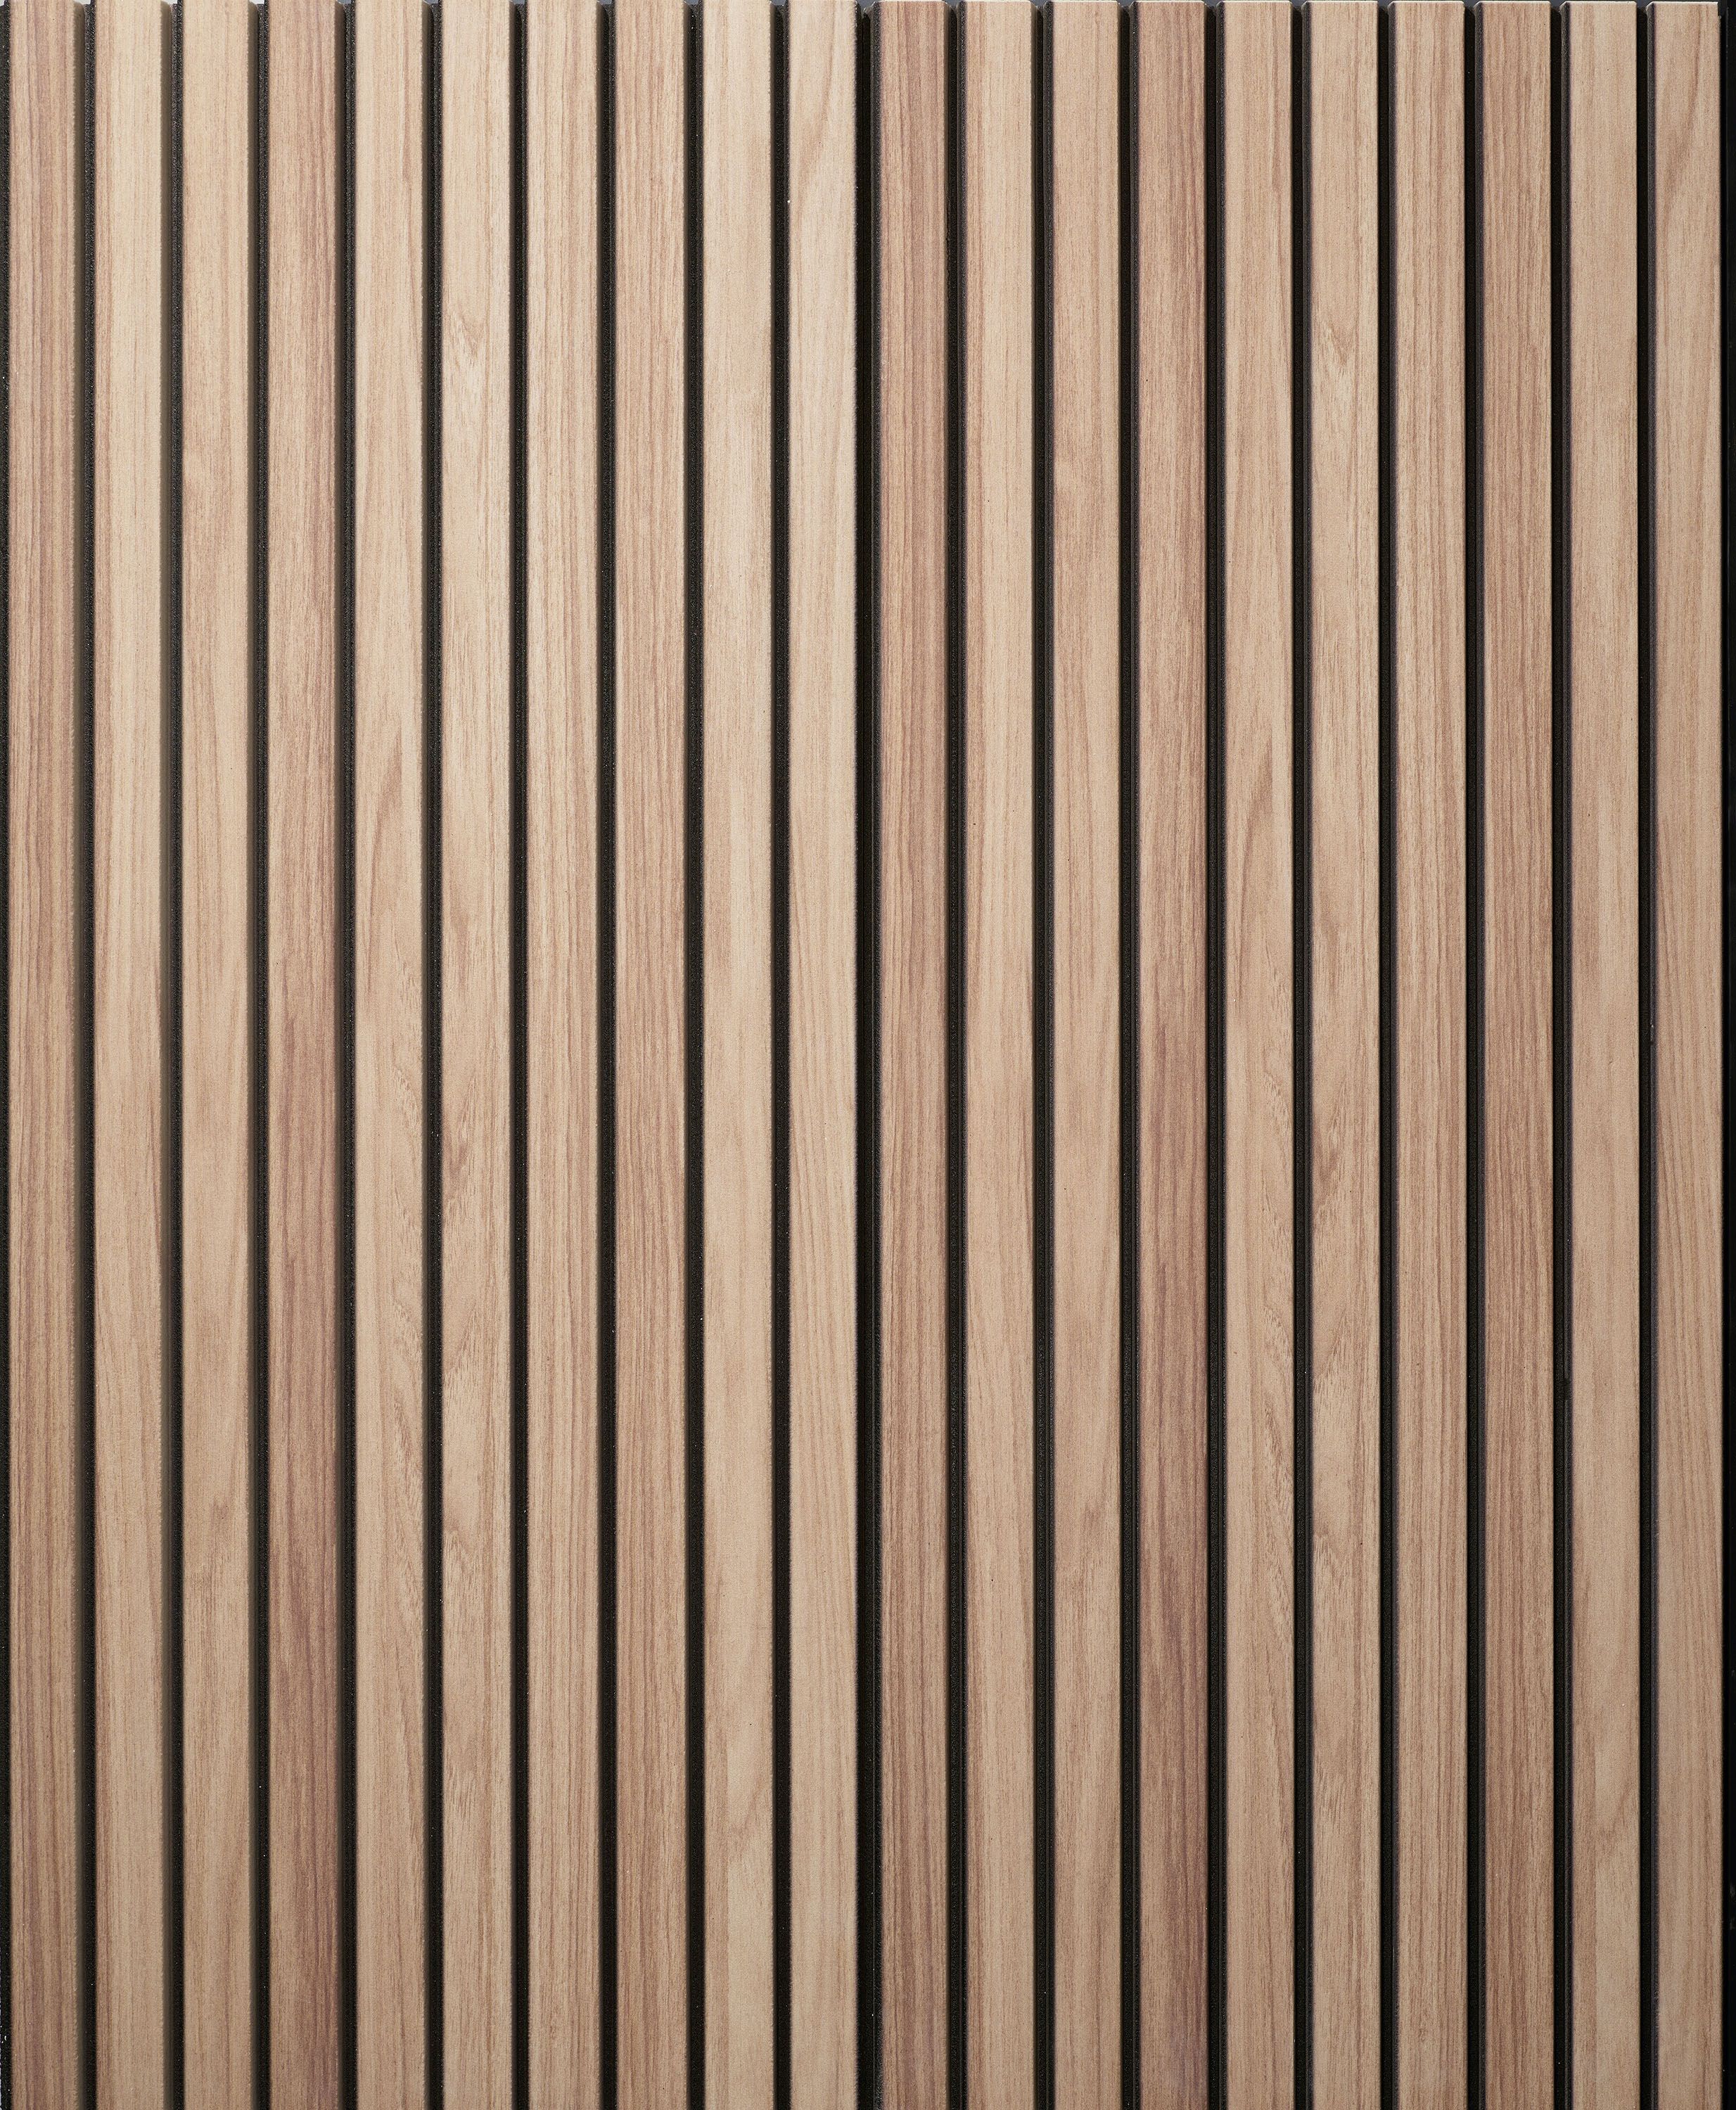 WALL!SUPPLY 20-in x 46-in Smooth Brown Eps Foam Wall Panel (4-Pack) | Lowe's